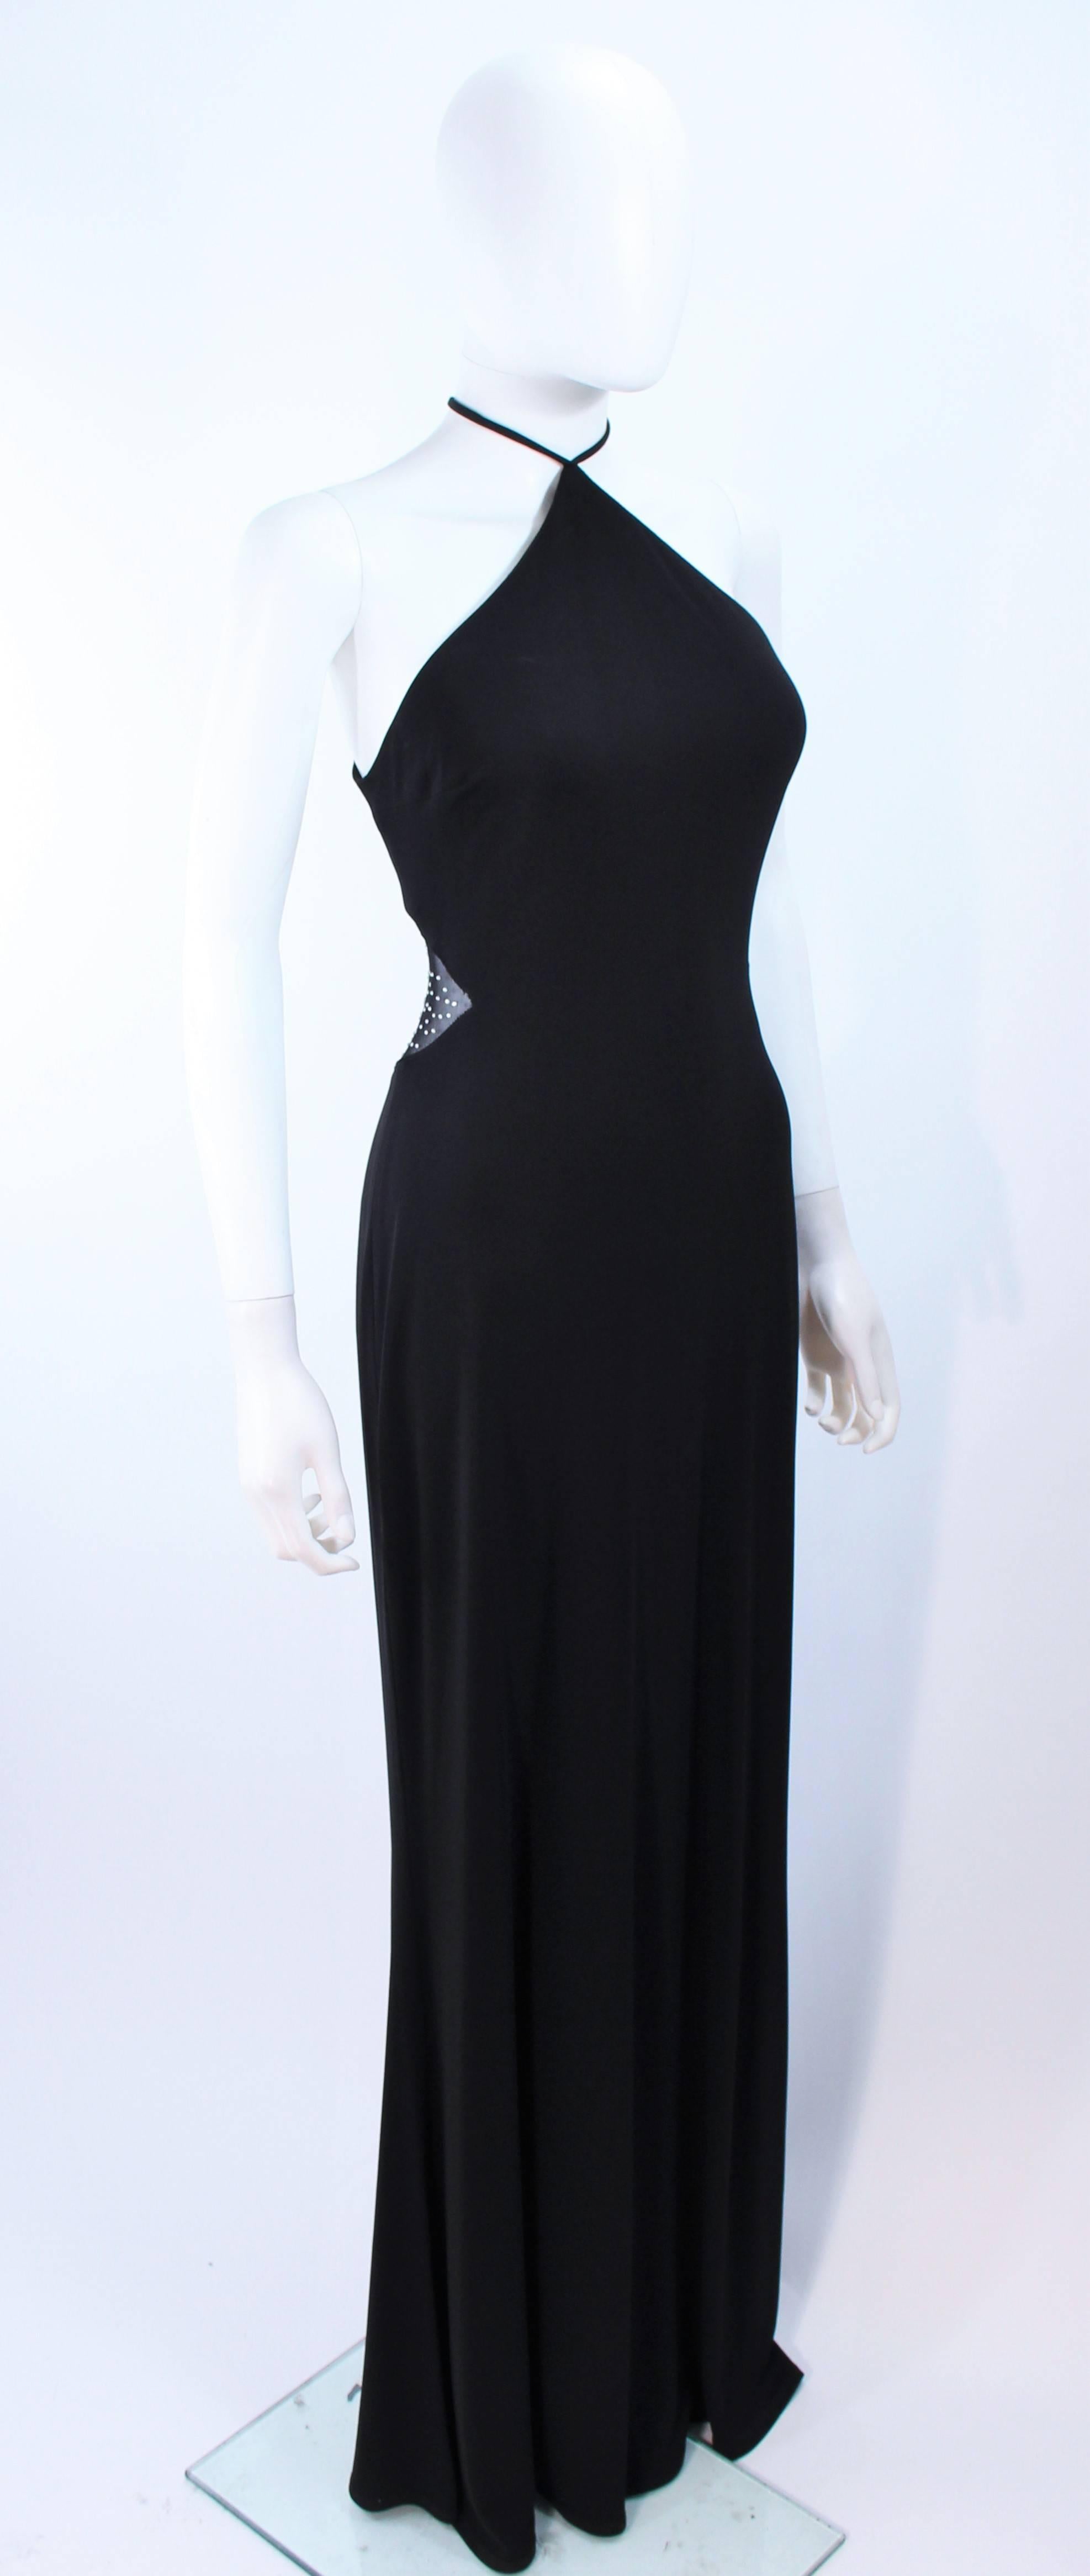 This Nicole Barti gown is composed of a black jersey. Features a sheer mesh back with rhinestone applique. In excellent vintage condition.

**Please cross-reference measurements for personal accuracy. 

Measures (Approximately)
Length: